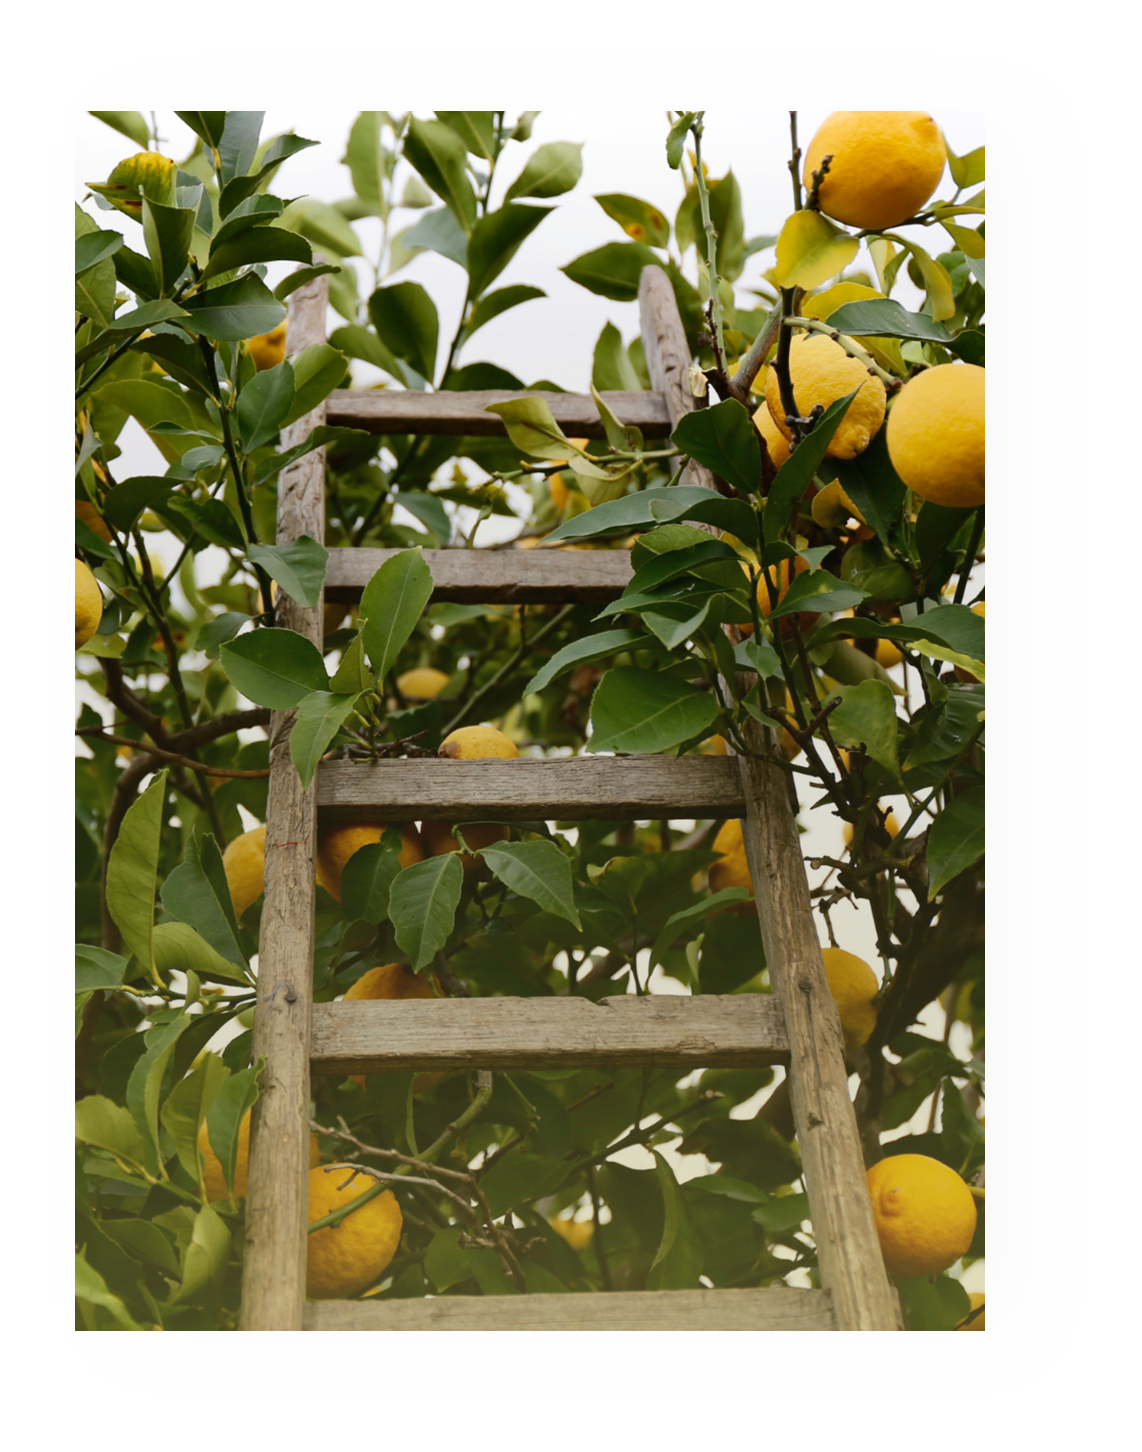 Lemons at risk, in 30 years reduced production by 40%